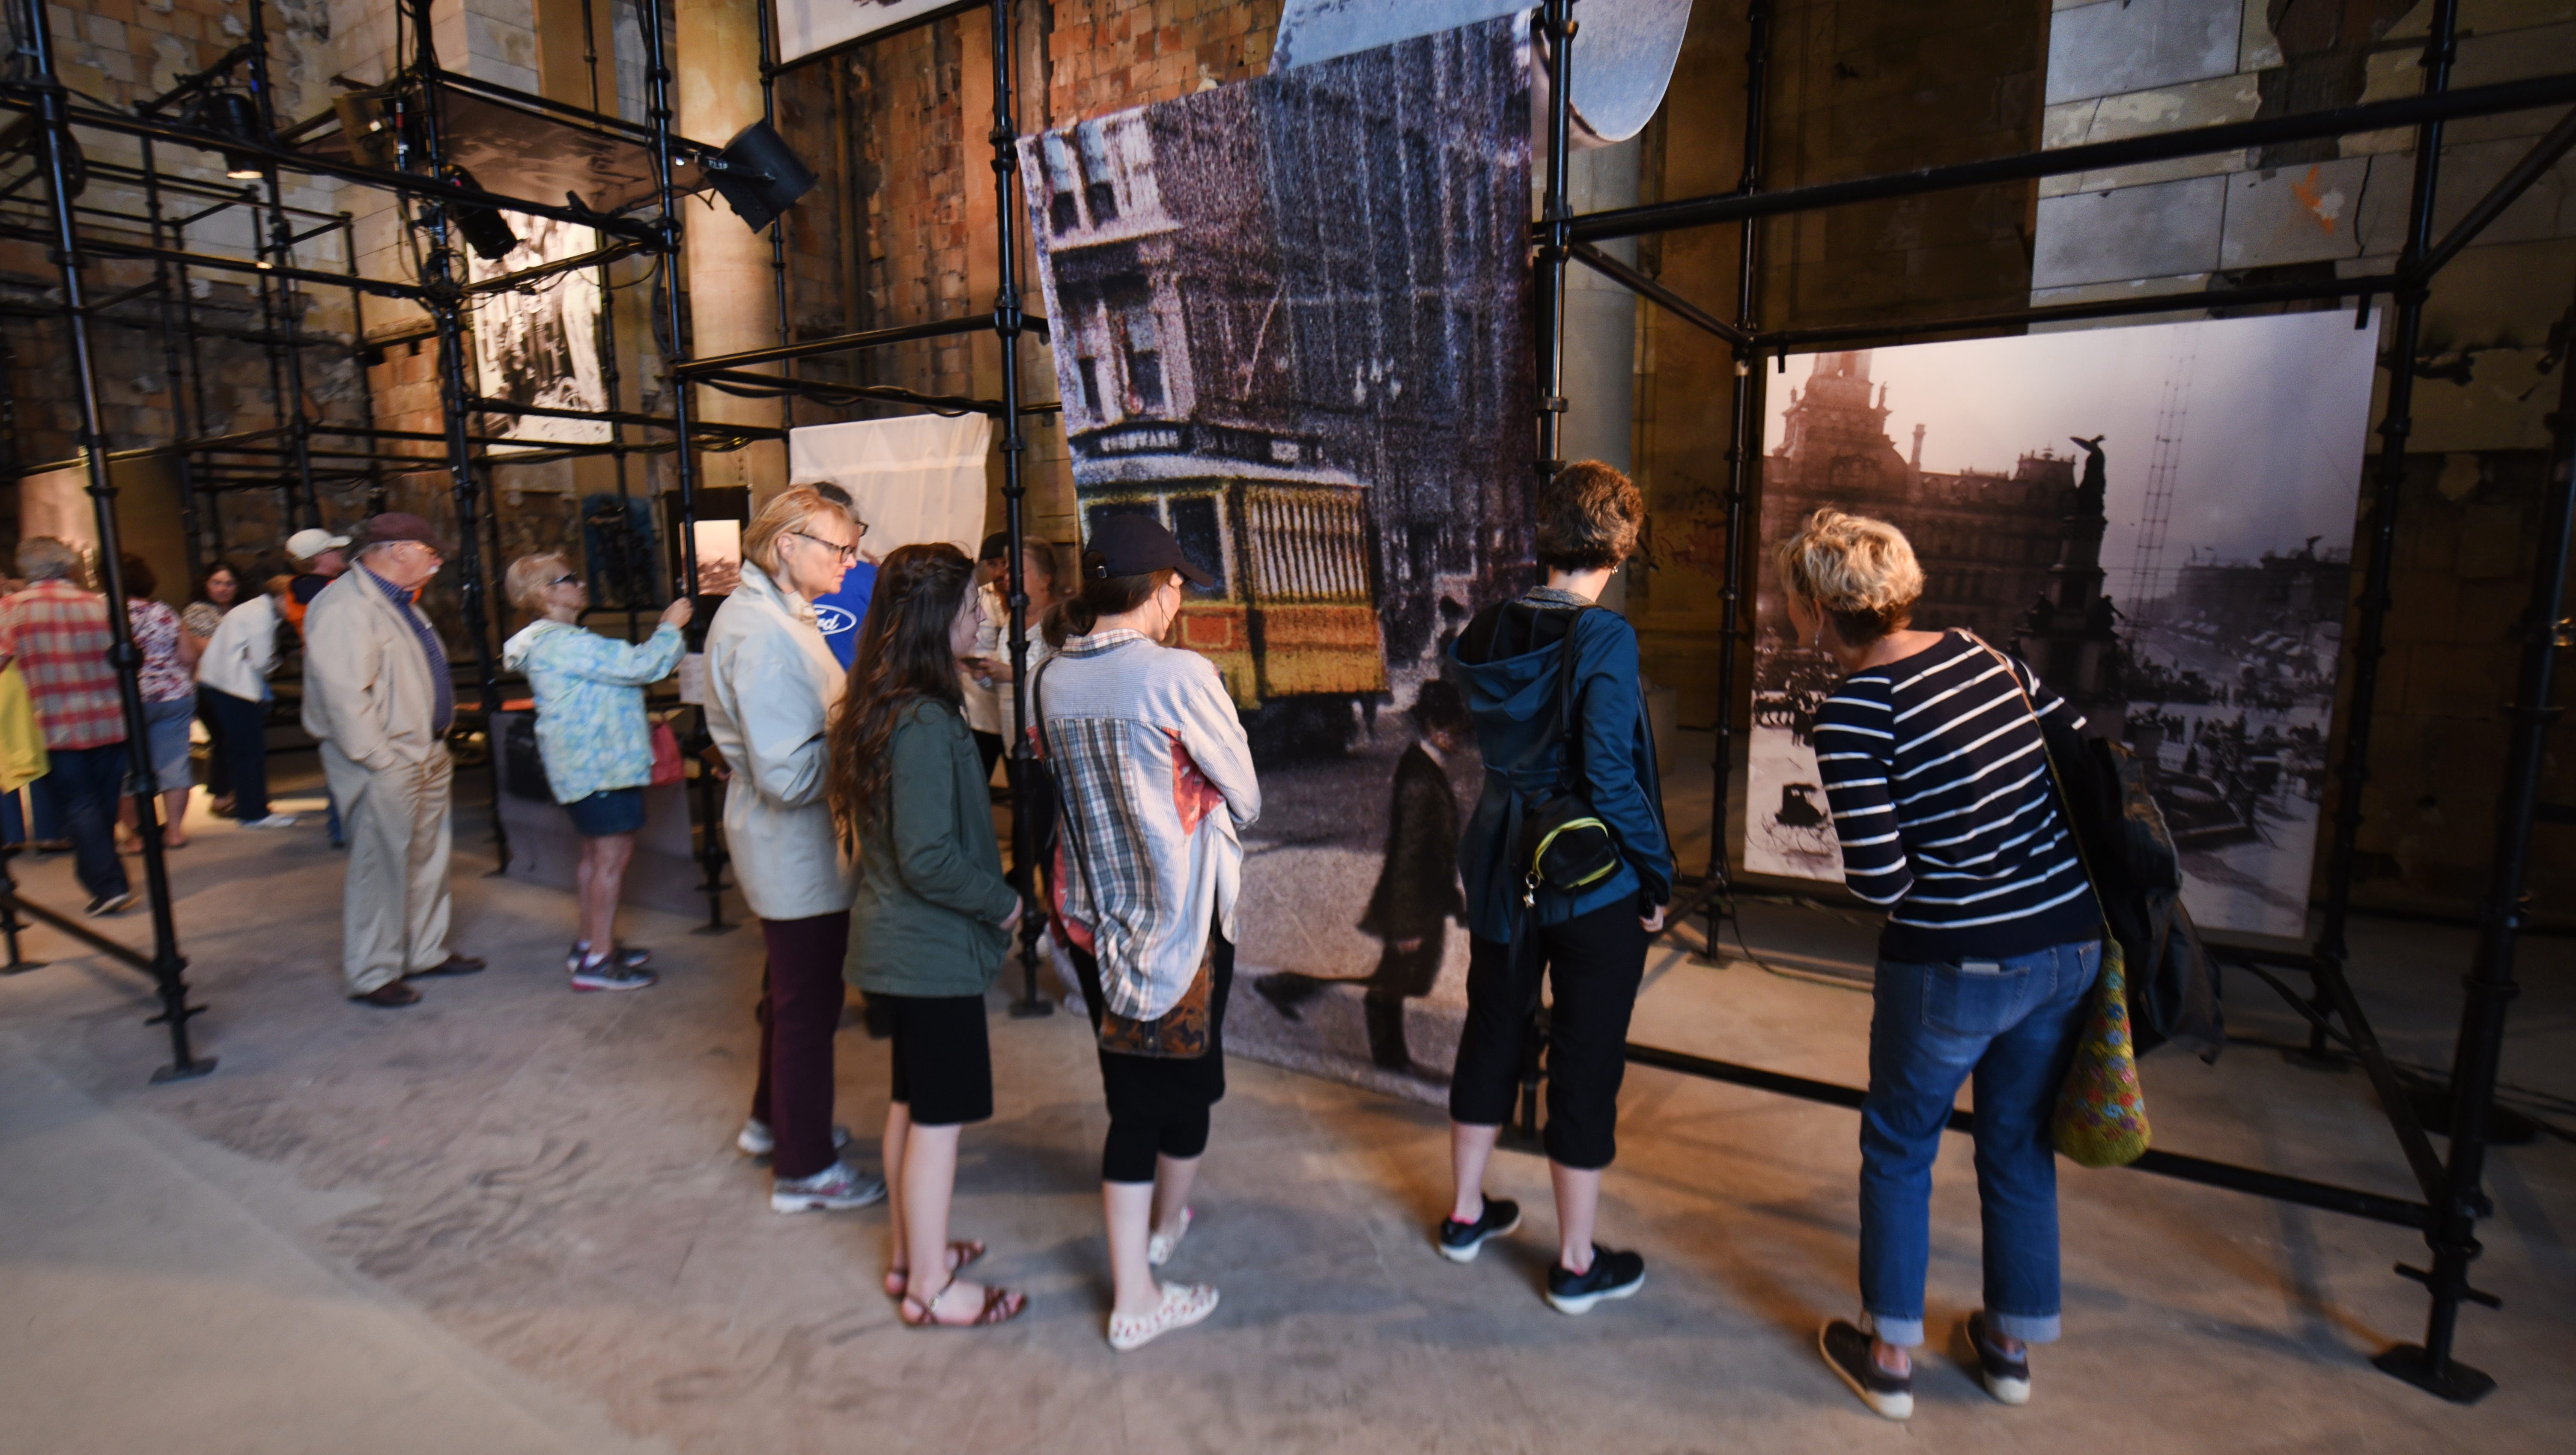 Historical displays show imagery and artifacts from when the Michigan Central Train Depot was open for business.